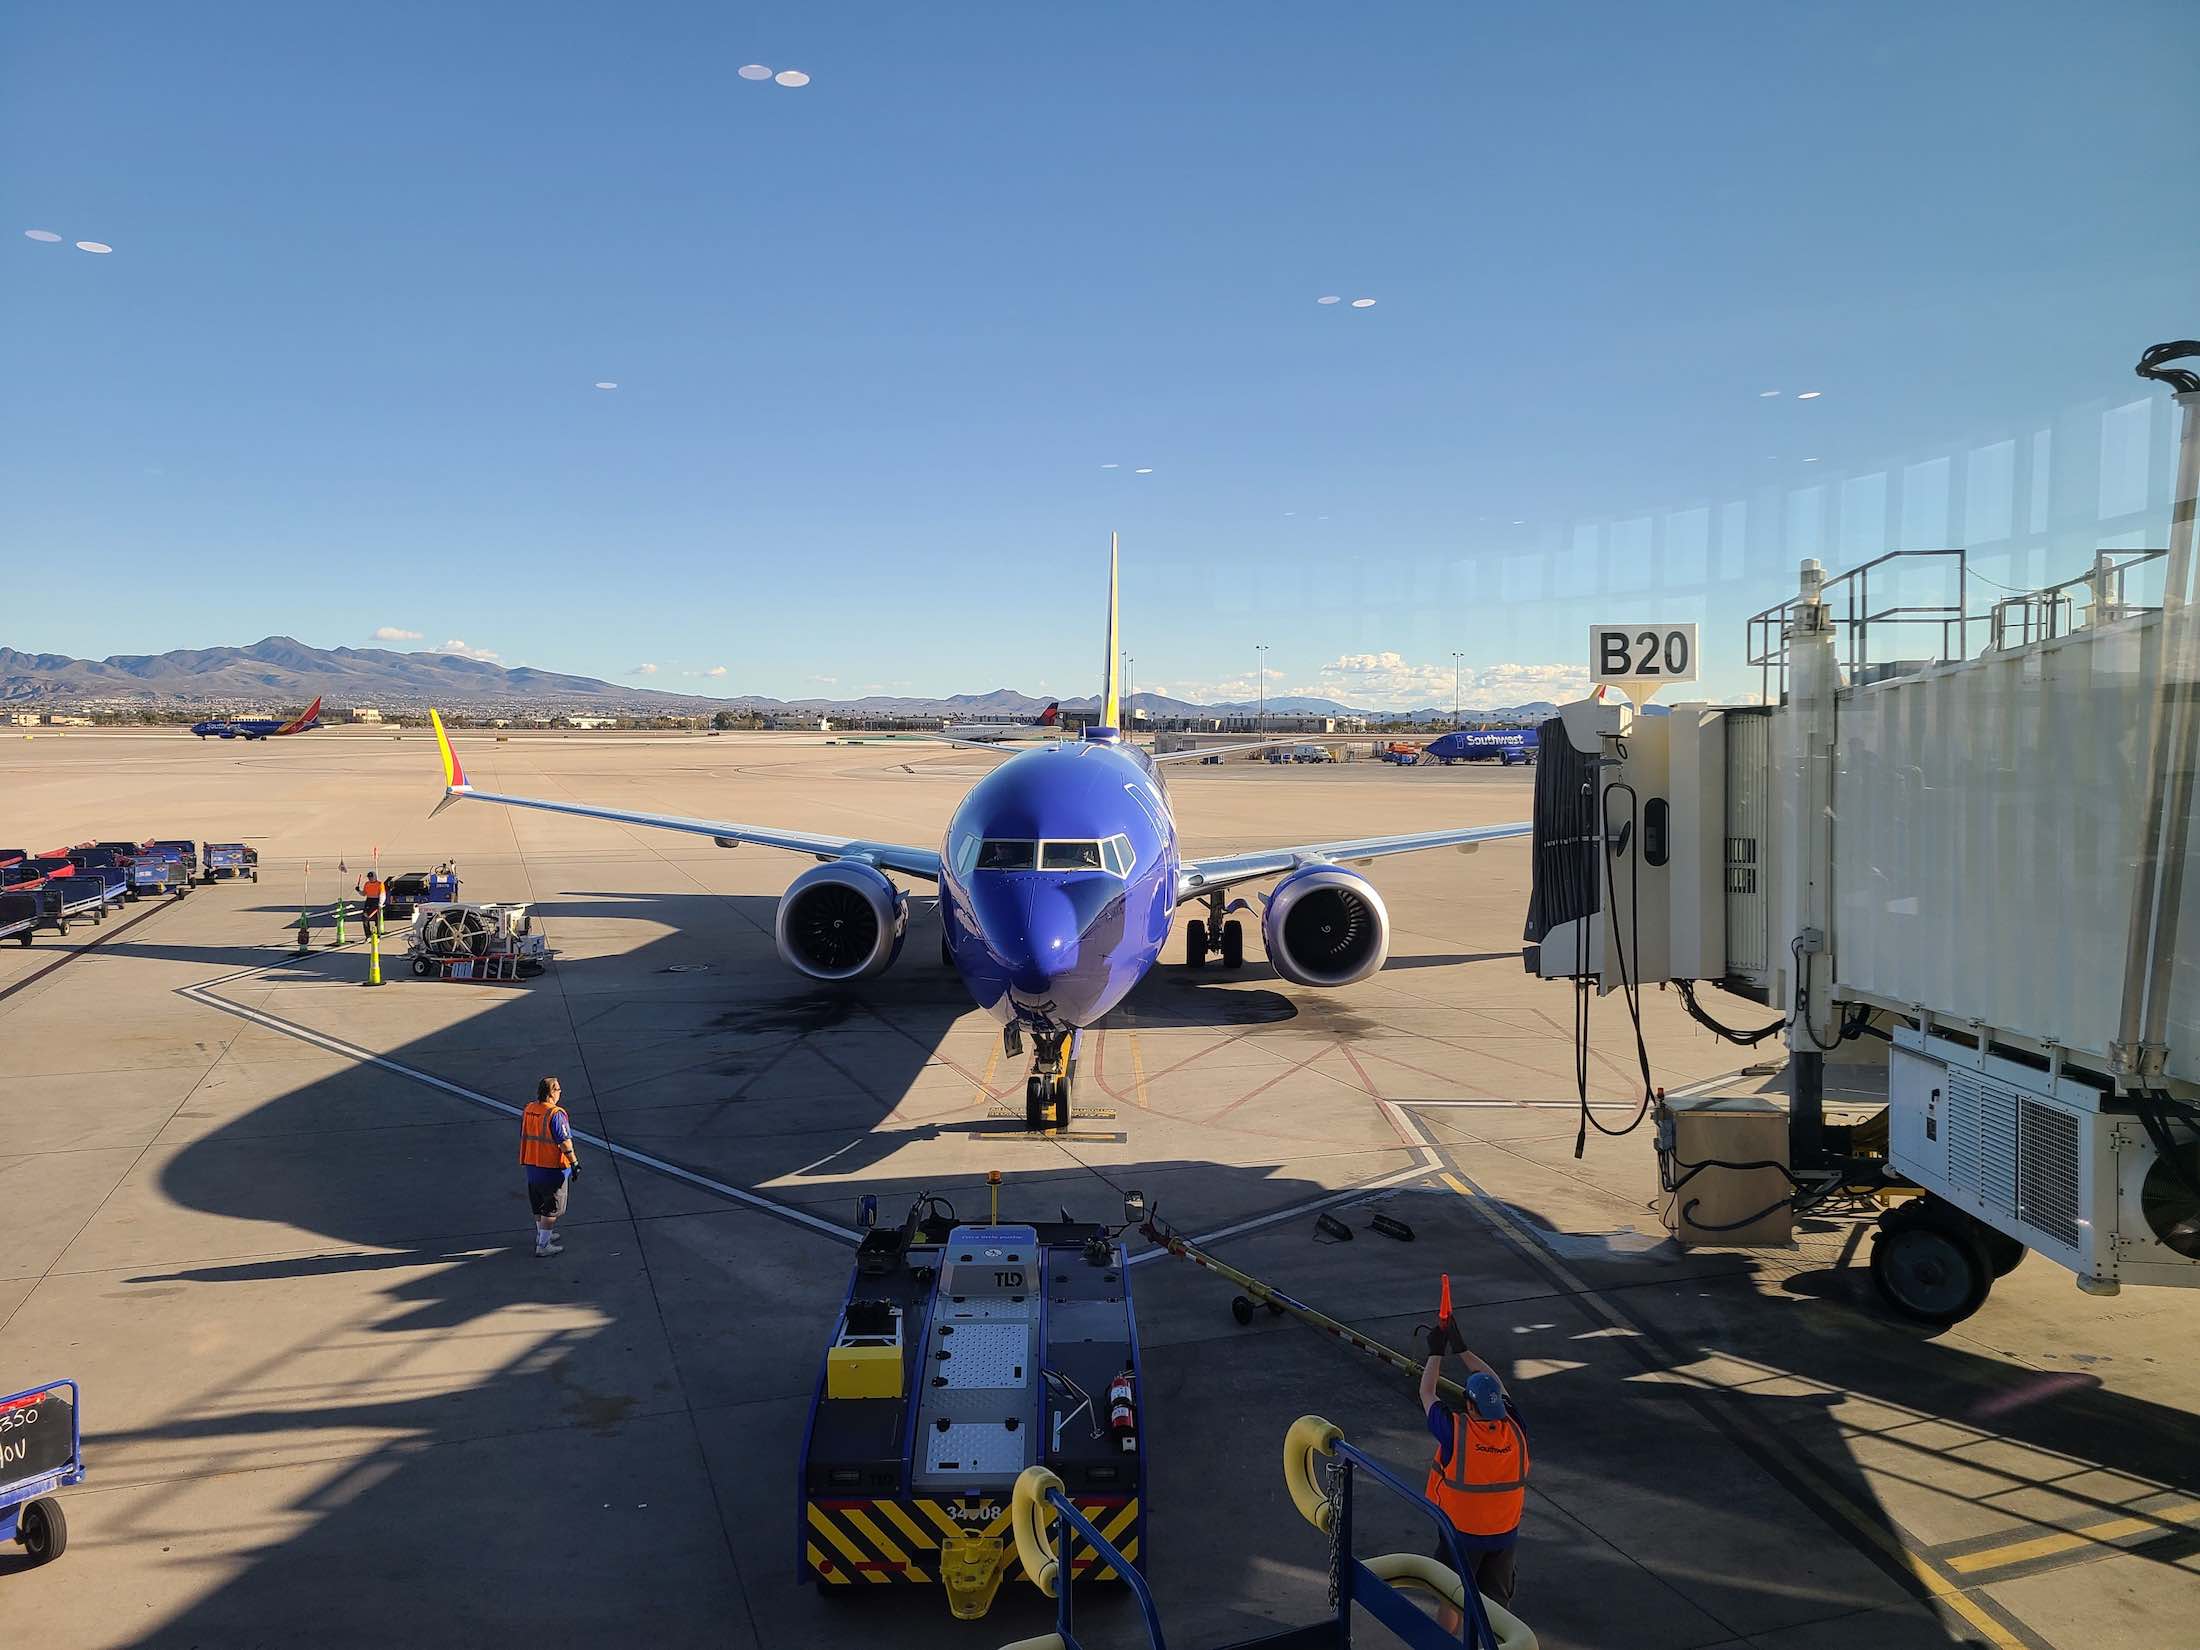 a blue airplane on the tarmac